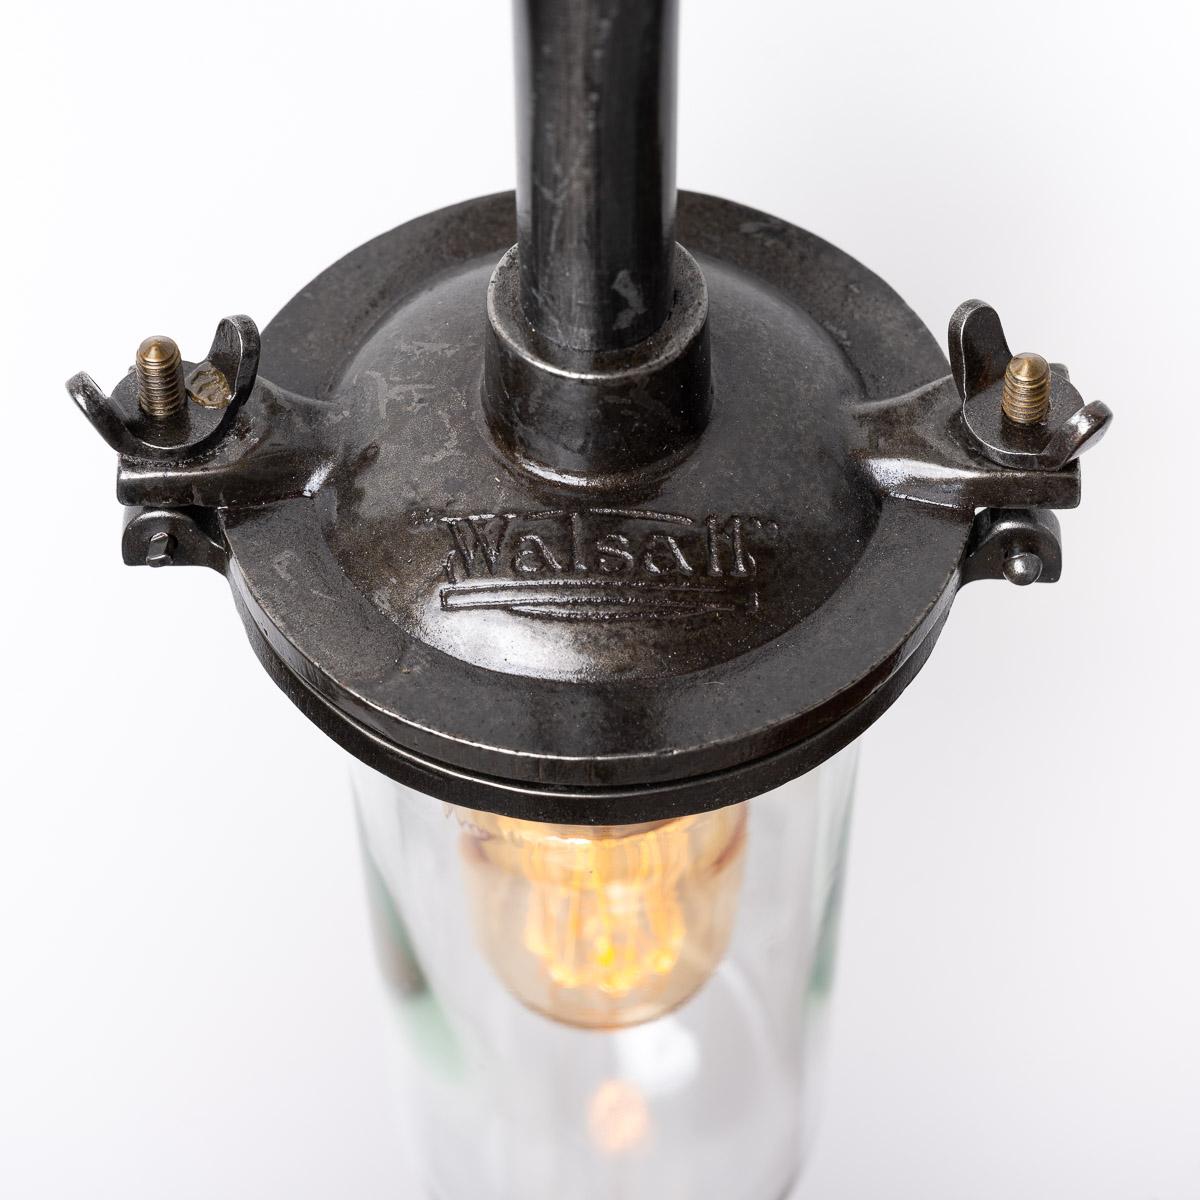 Cast Reclaimed Vintage Well Glass Wall Light Fittings by Walsall Conduits Ltd For Sale